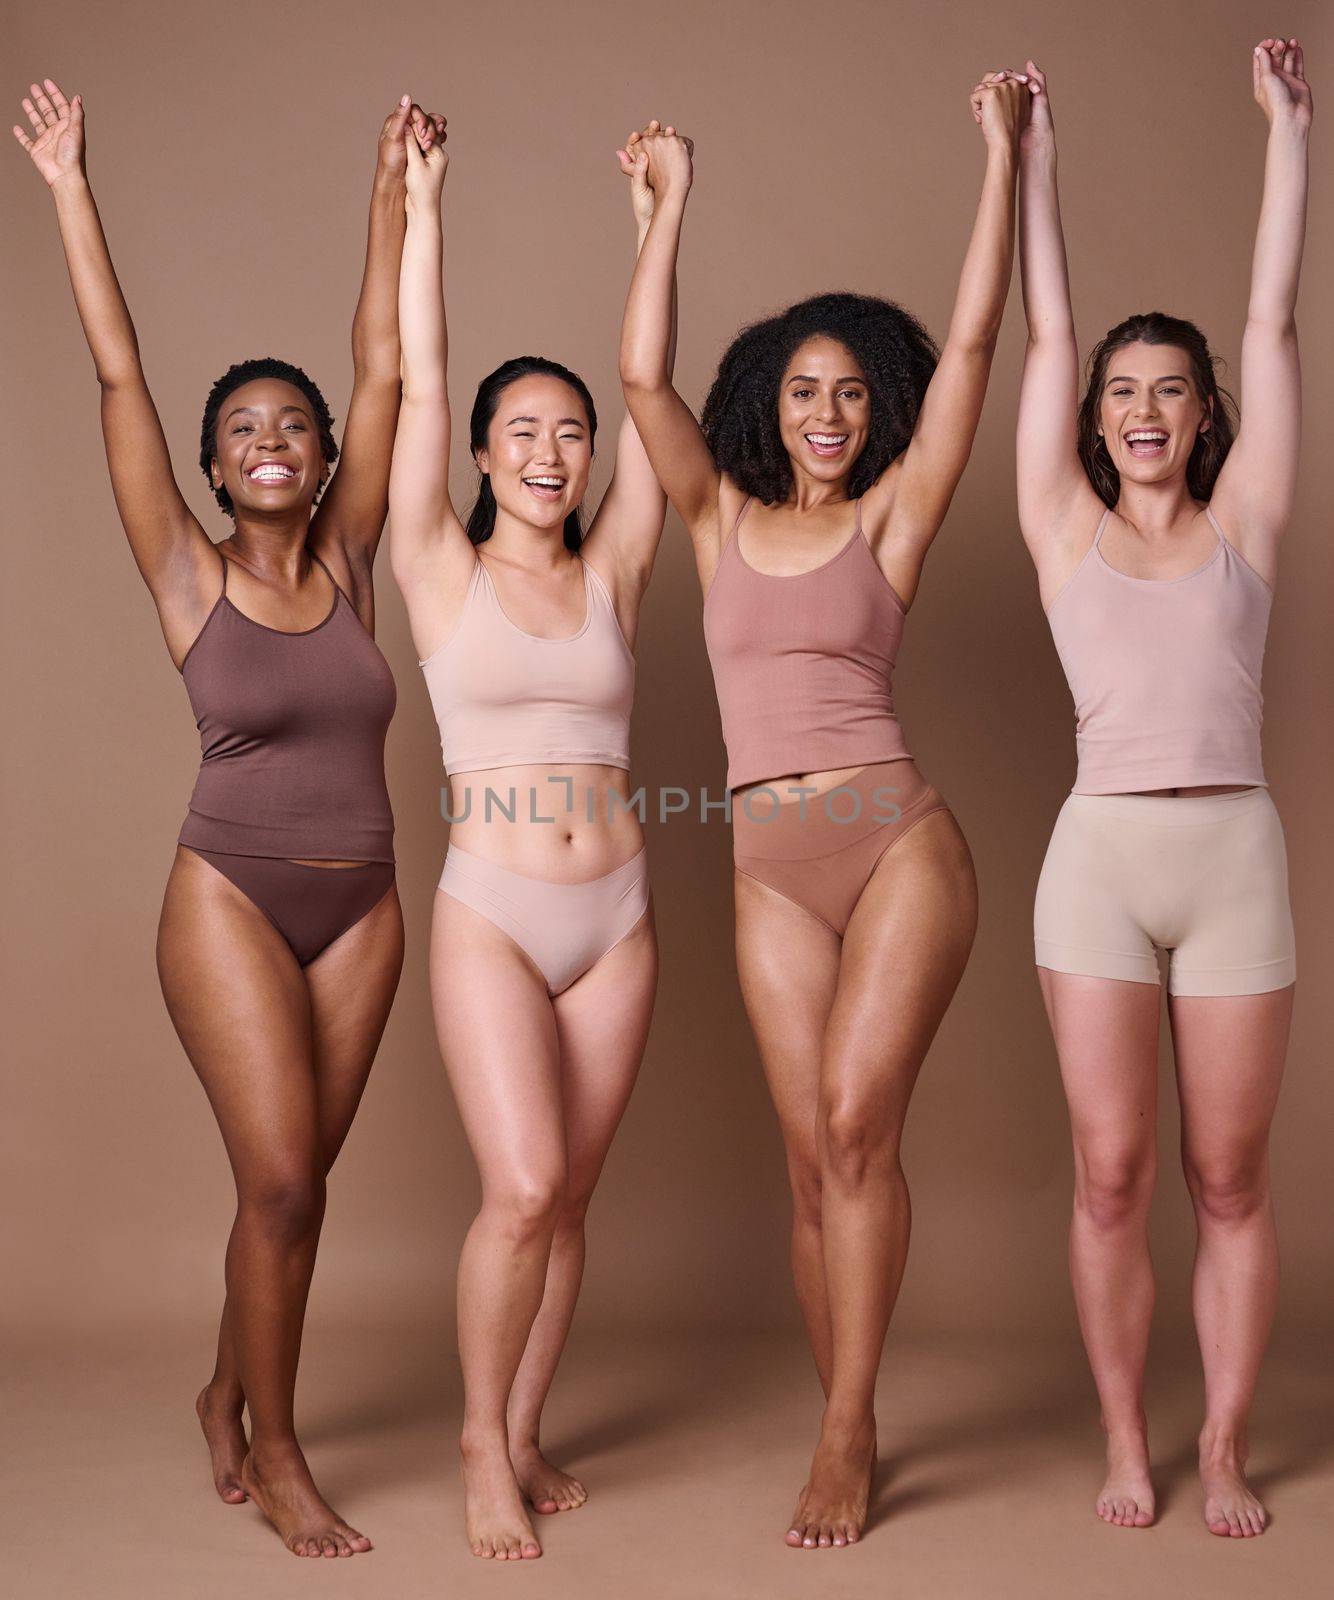 Diversity, women and natural beauty friends in studio in brown background with hands raised in celebration and support together. Diverse woman, underwear and celebrate body care or healthy lifestyle by YuriArcurs